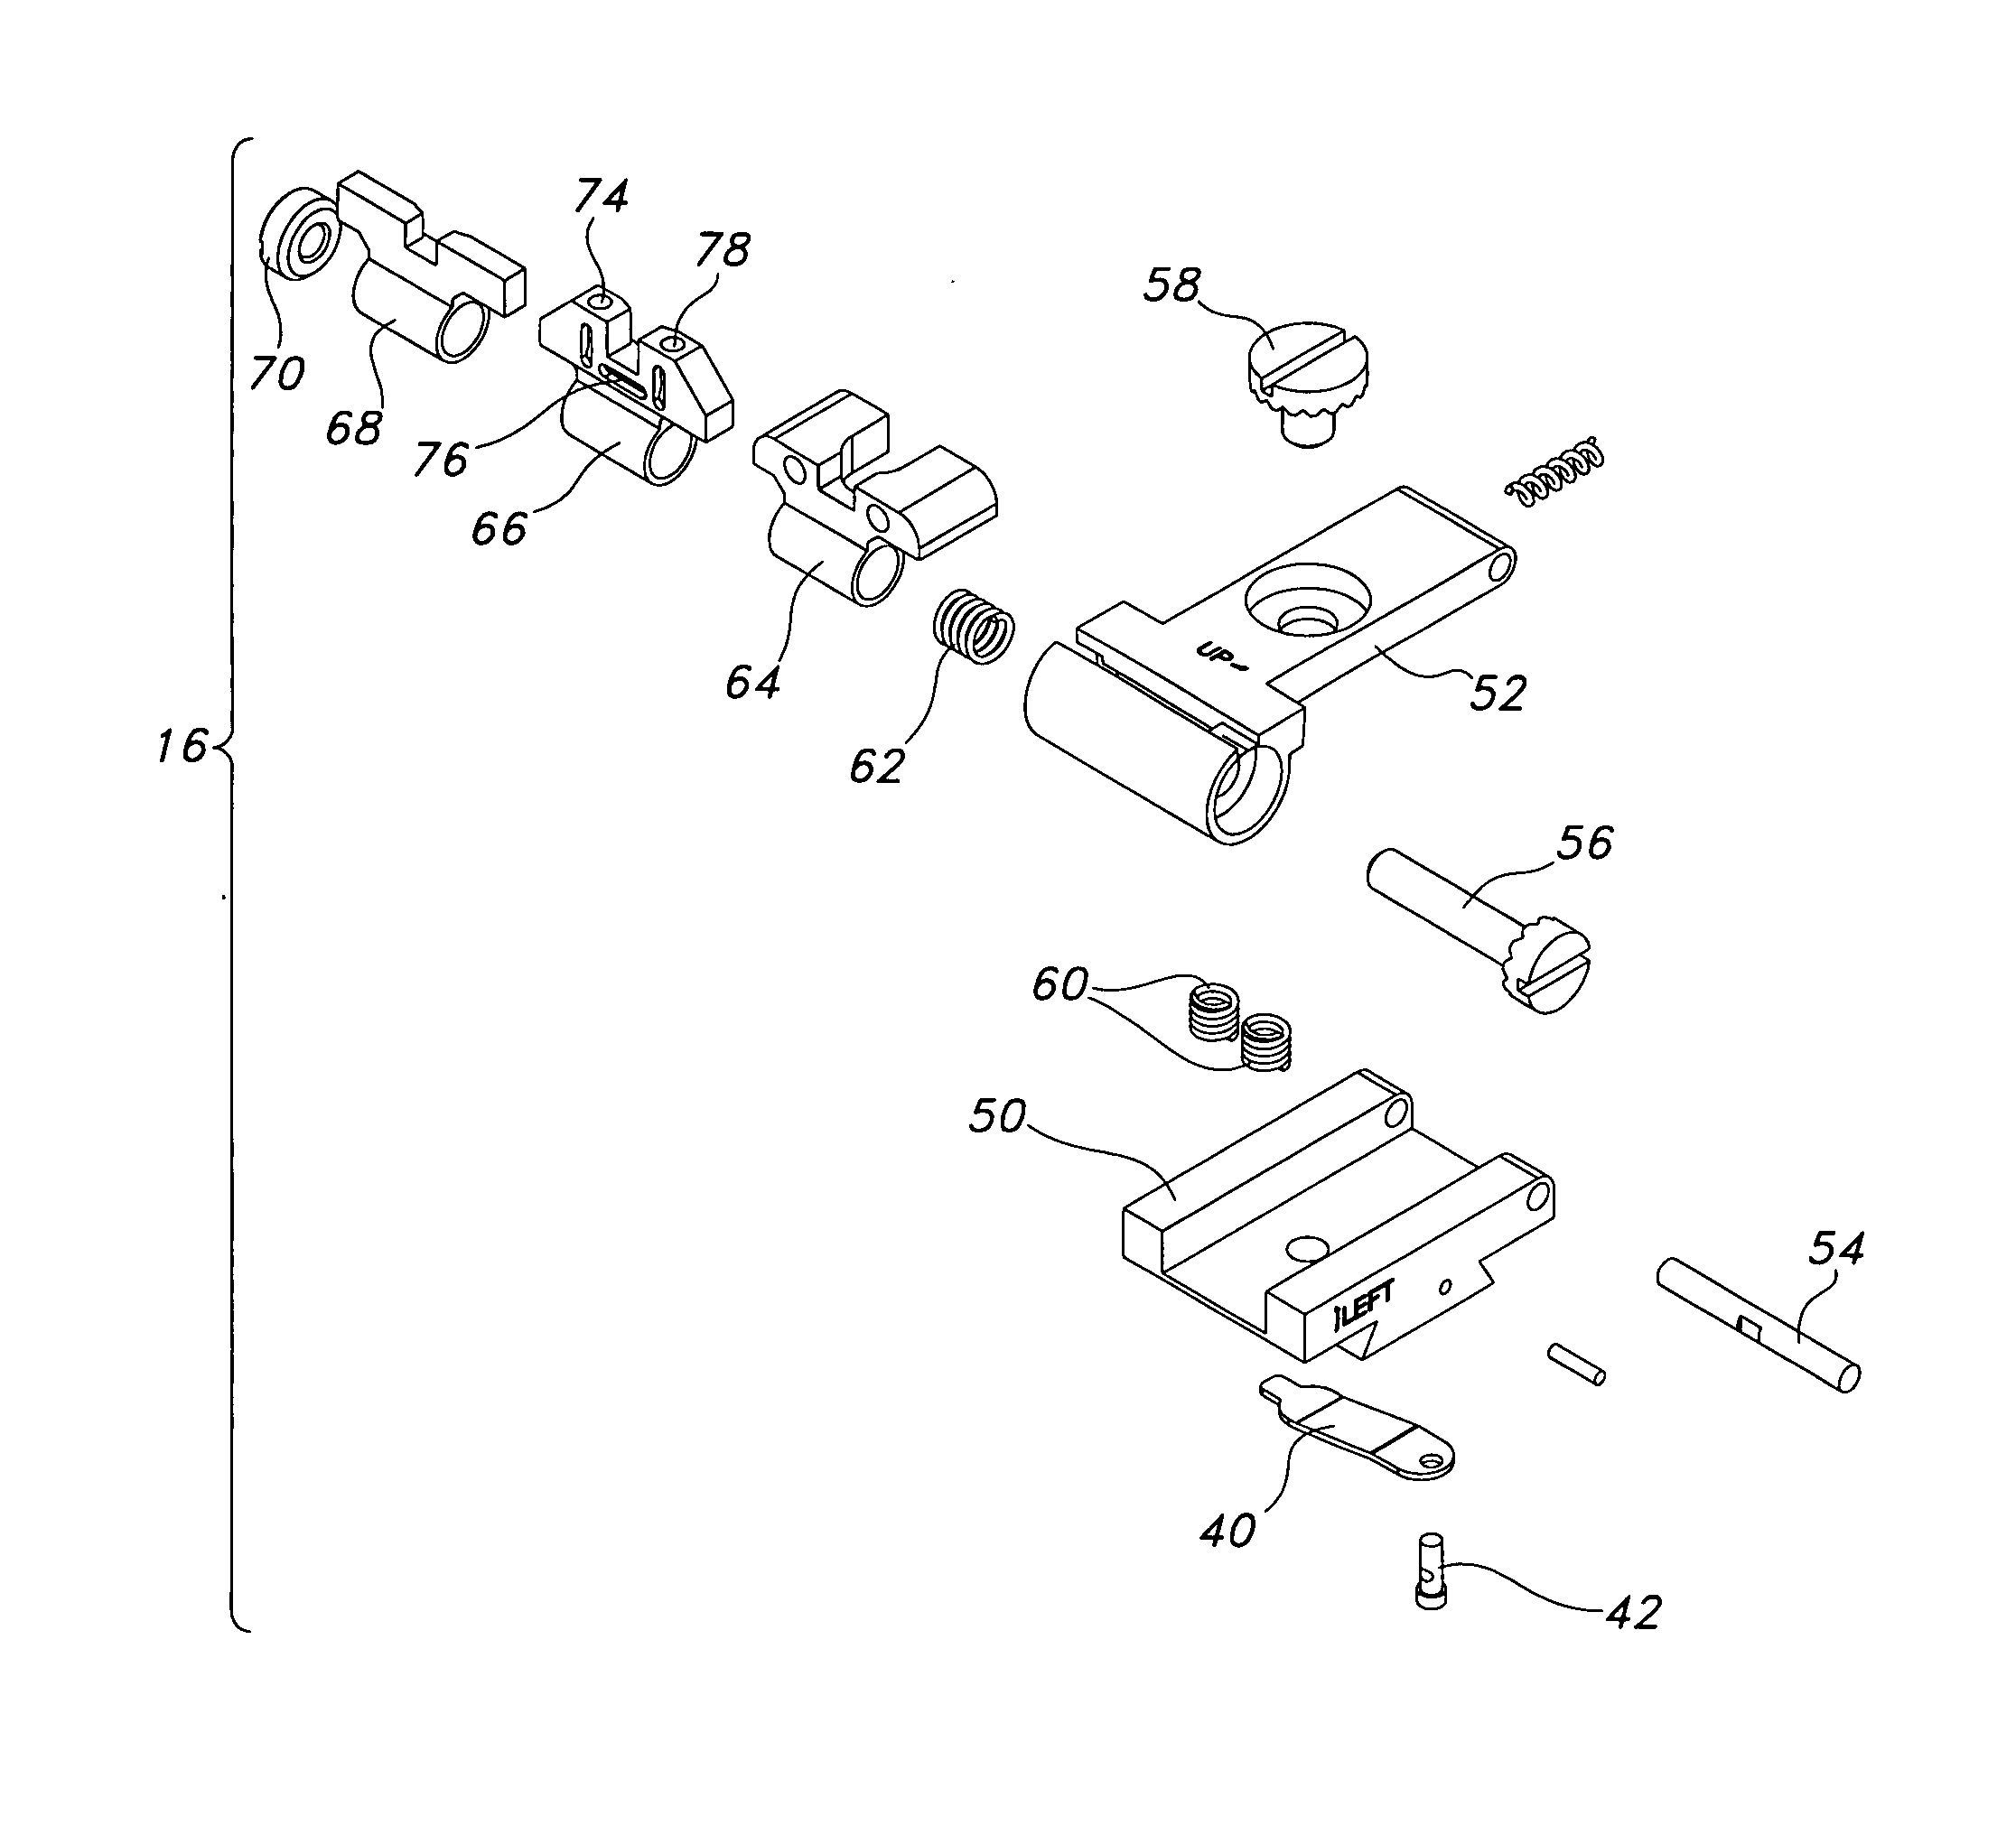 Firearm adapted for use in low light, illuminating rear sight, and method for aligning sights in low light environments